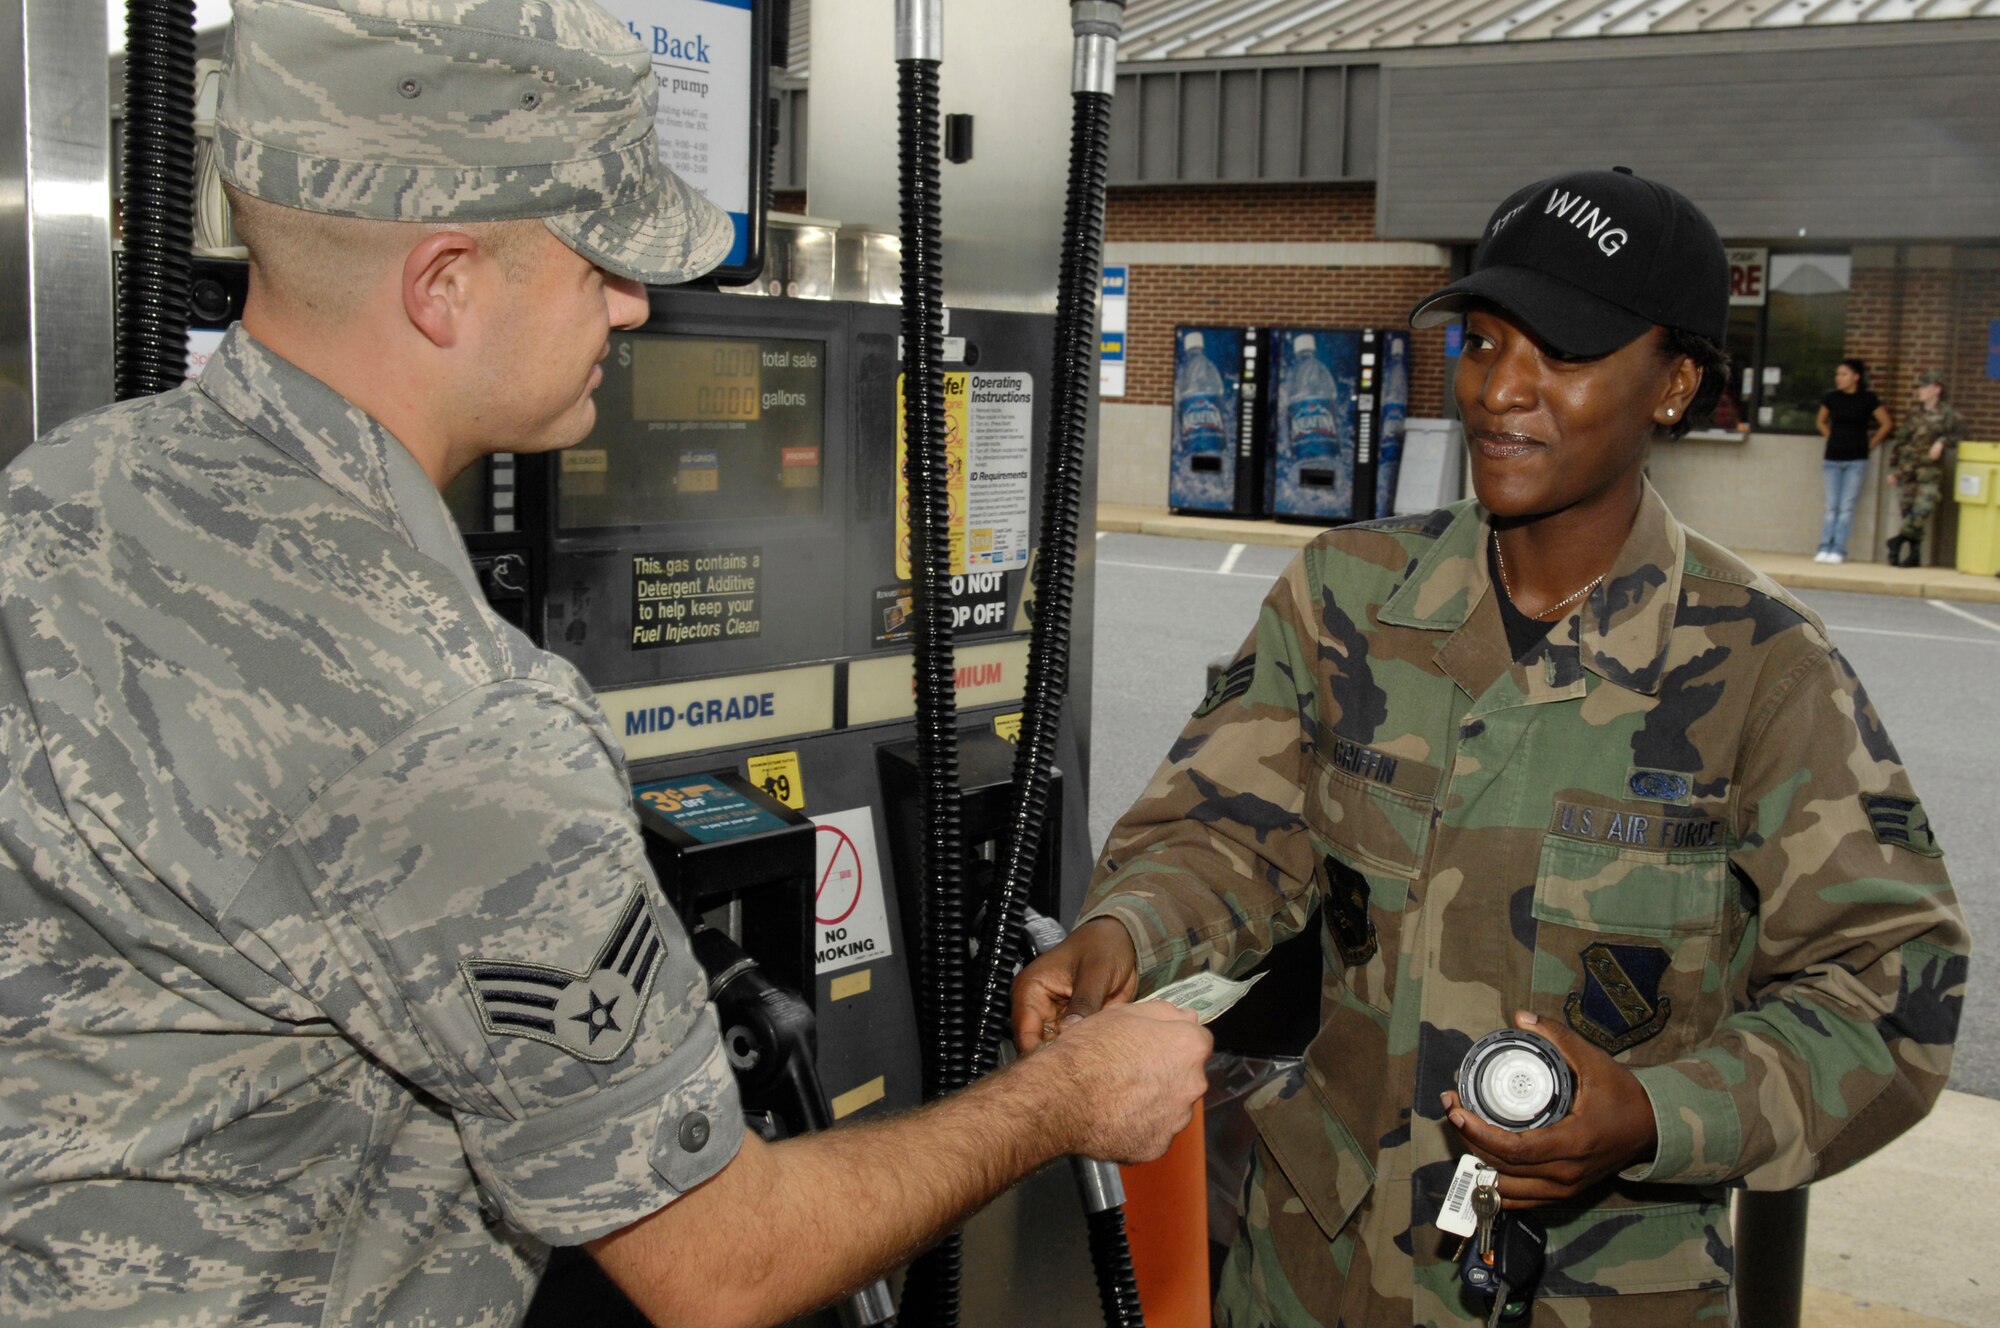 Senior Airman Dan DeCook, Airmen of Distinction events coordniator, hands $20 to Senior Airman Matoya Griffin Sept. 12 at the Bolling Shoppette. The AOD gave away a total of $240 in gas money to Air Force E-4's and below to raise awareness of the council and promote what the council does. (U.S. Air Force illistration by Senior Airmen R. Michael Longoria)